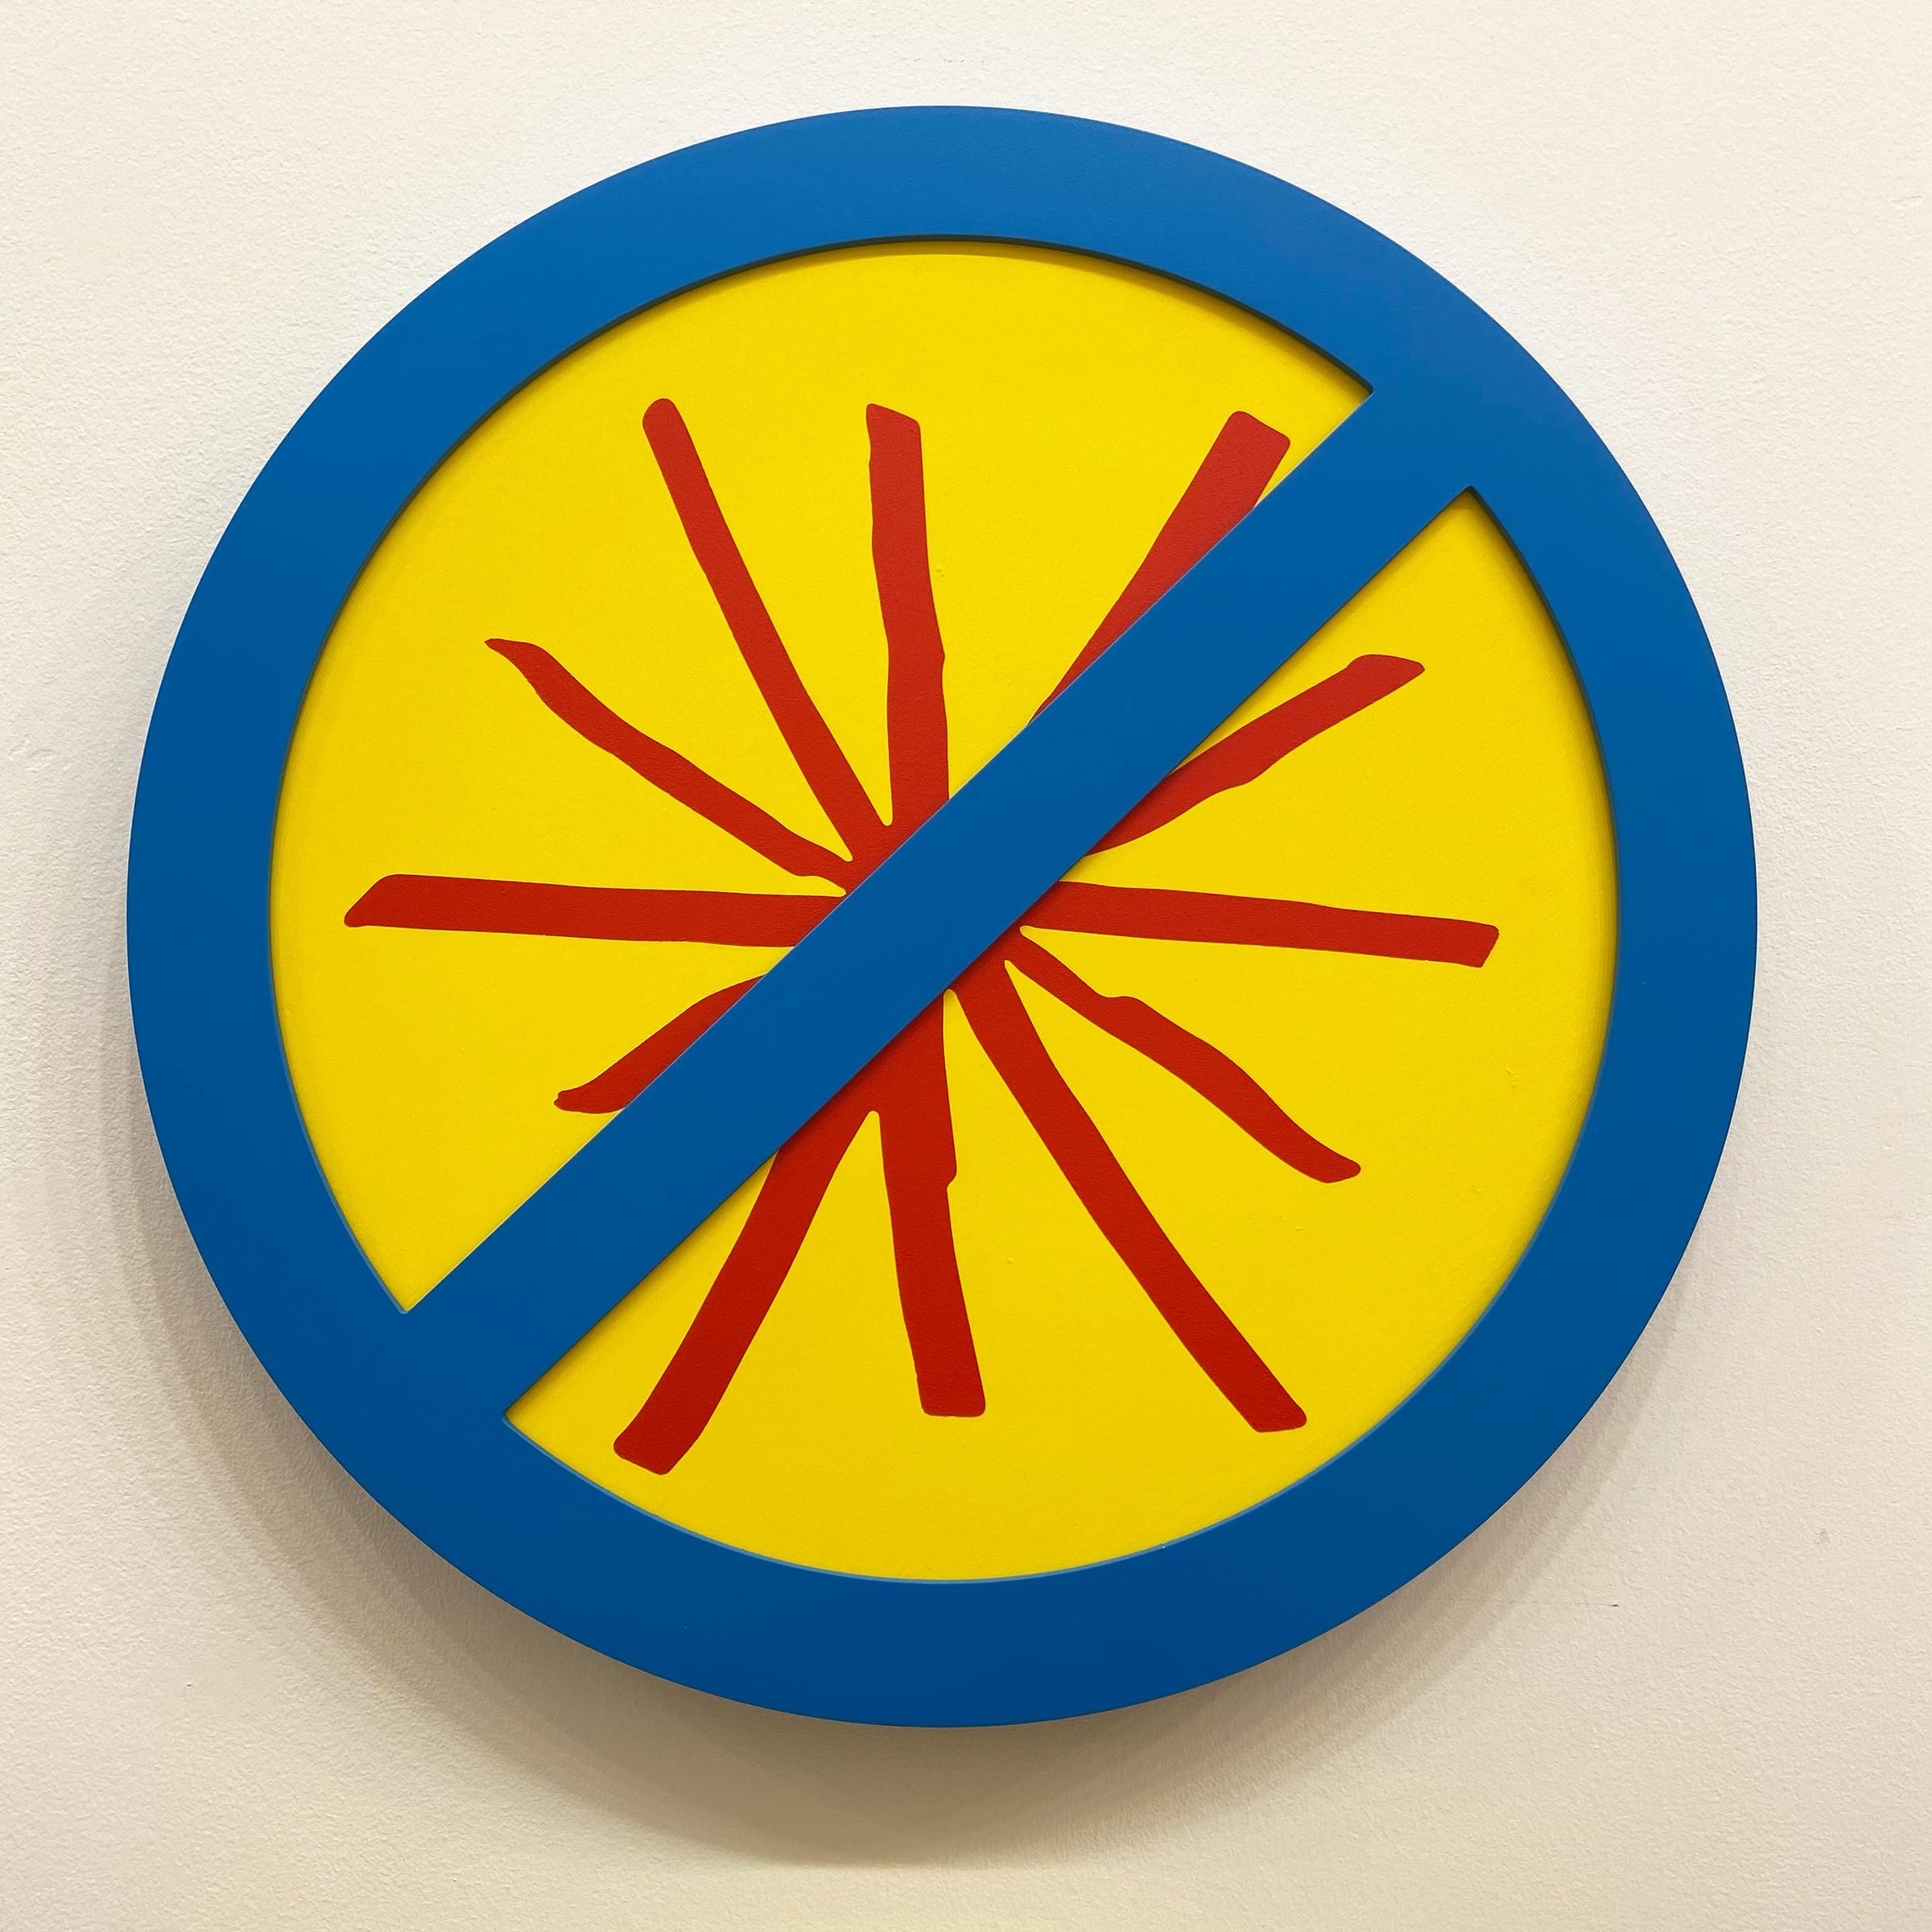 Michael Porten Portrait Painting - "No Assholes (Red on Yellow)" conceptual art, wall sculpture - Lawrence Weiner